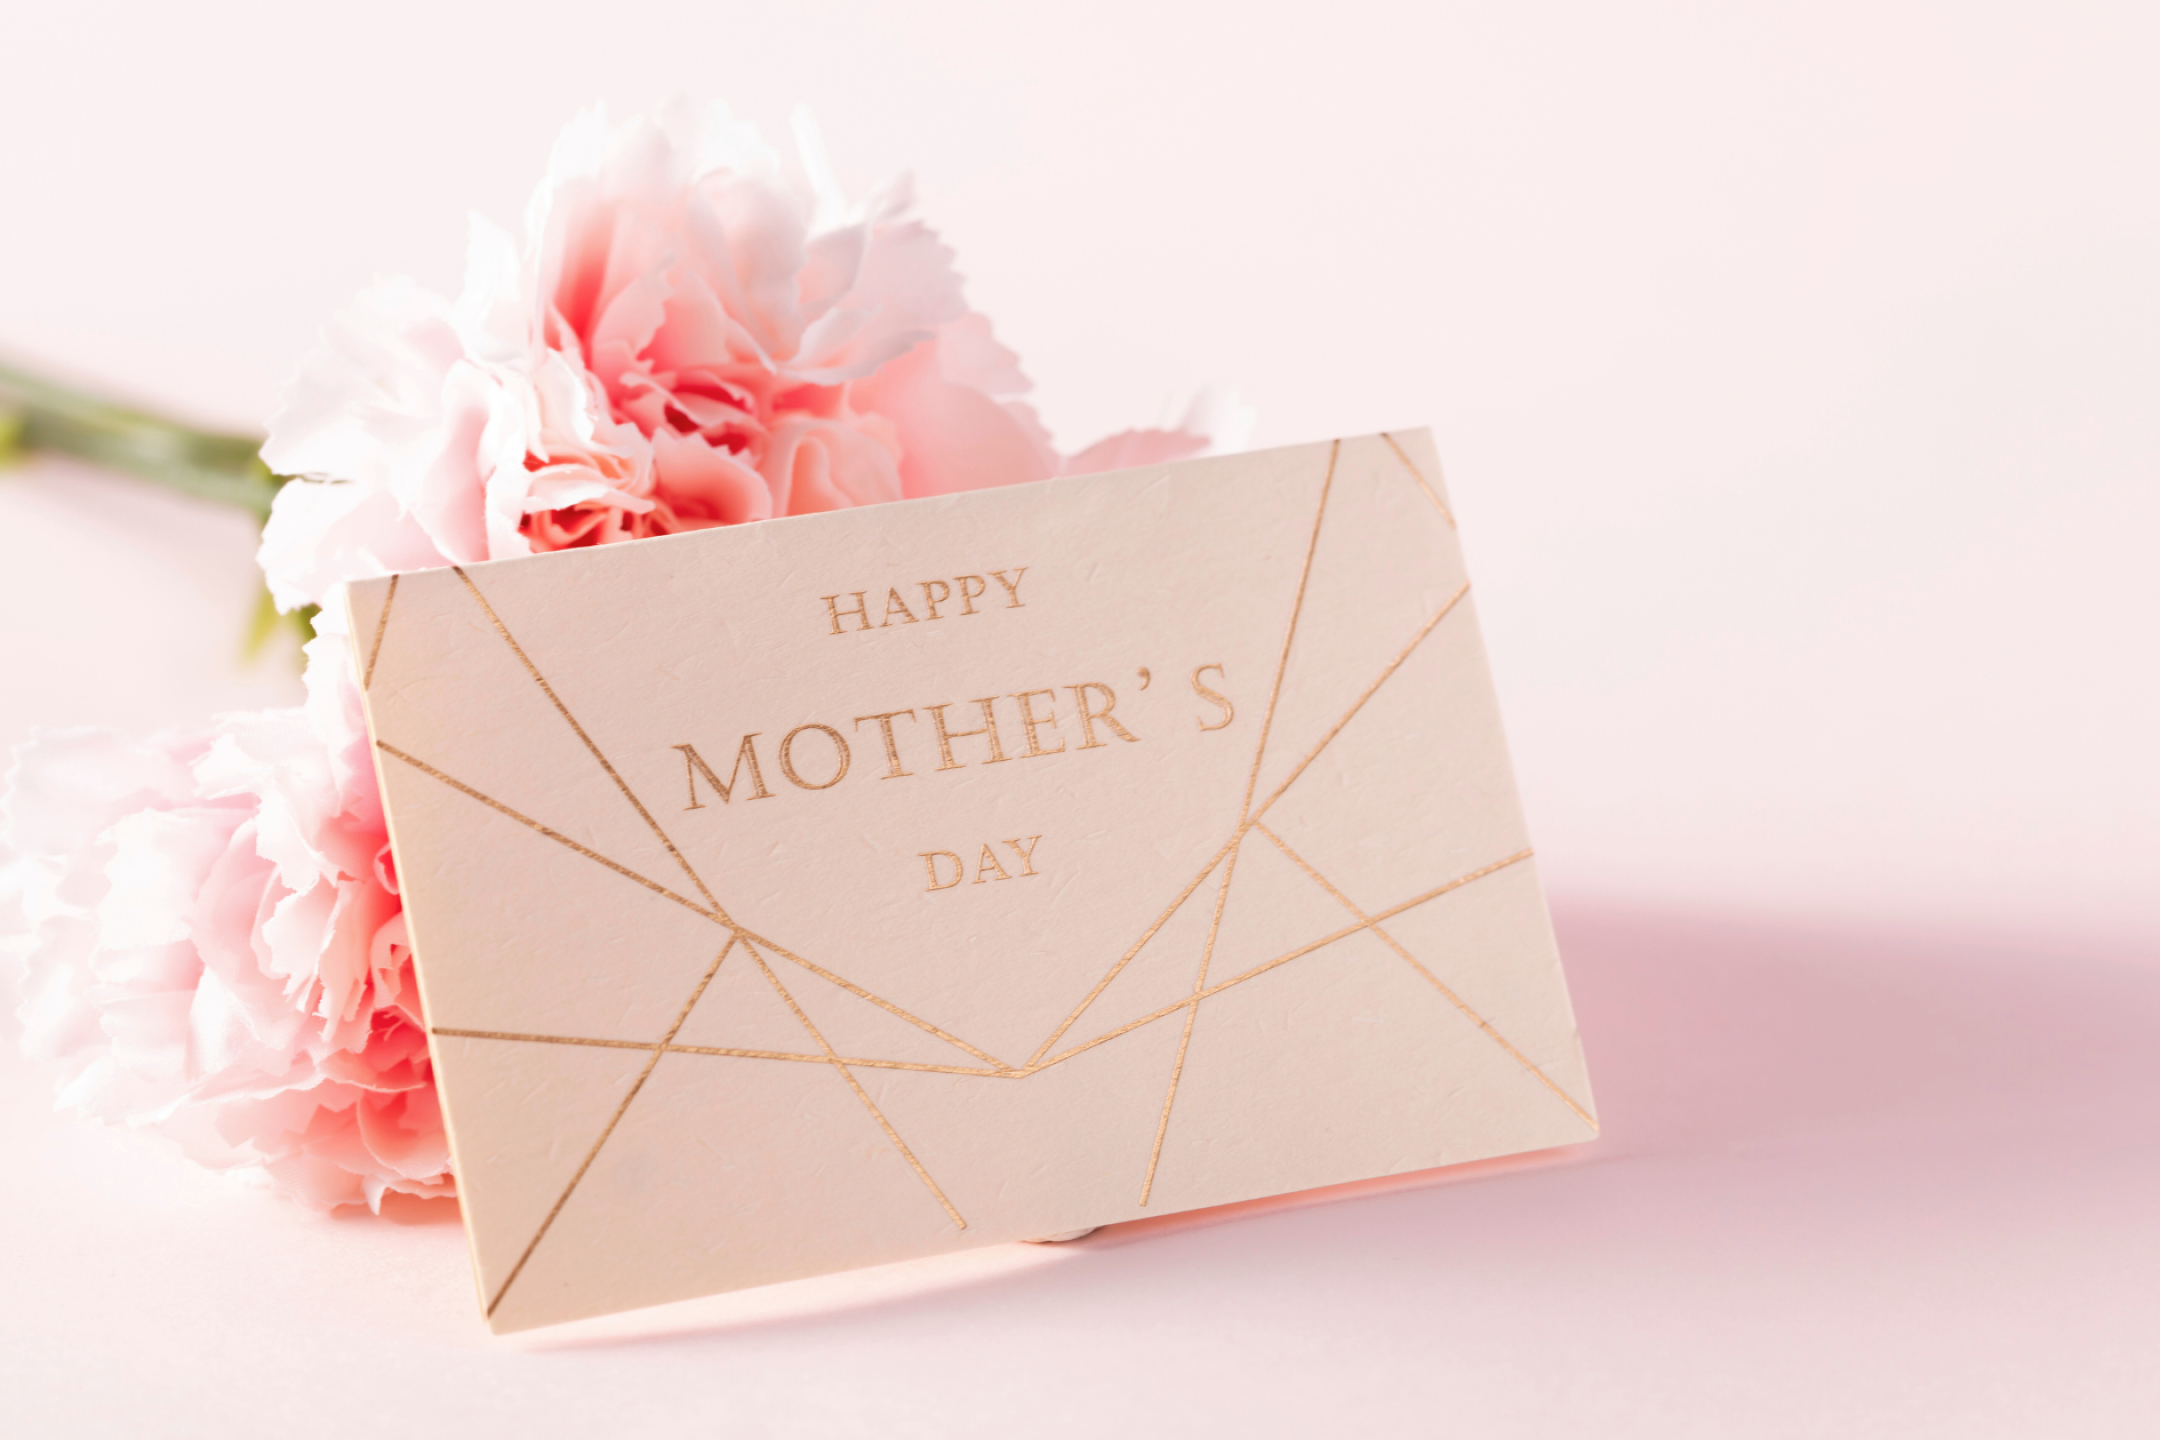 Happy Mother's Day card with inspirational quote beside a bouquet of flowers.